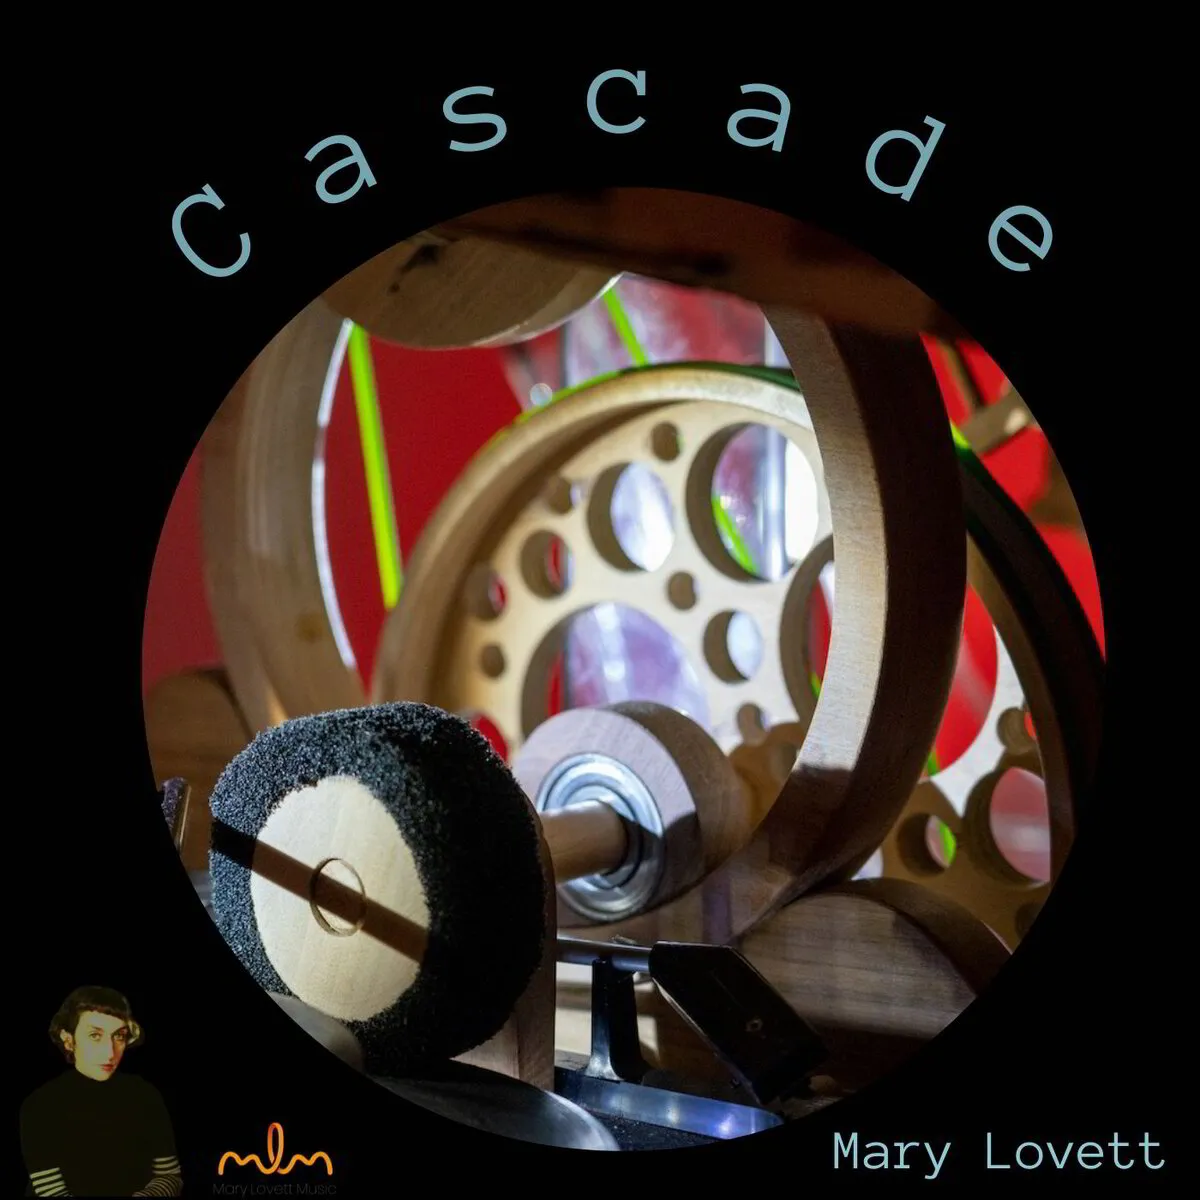 Cascade Download Single The Story of Things